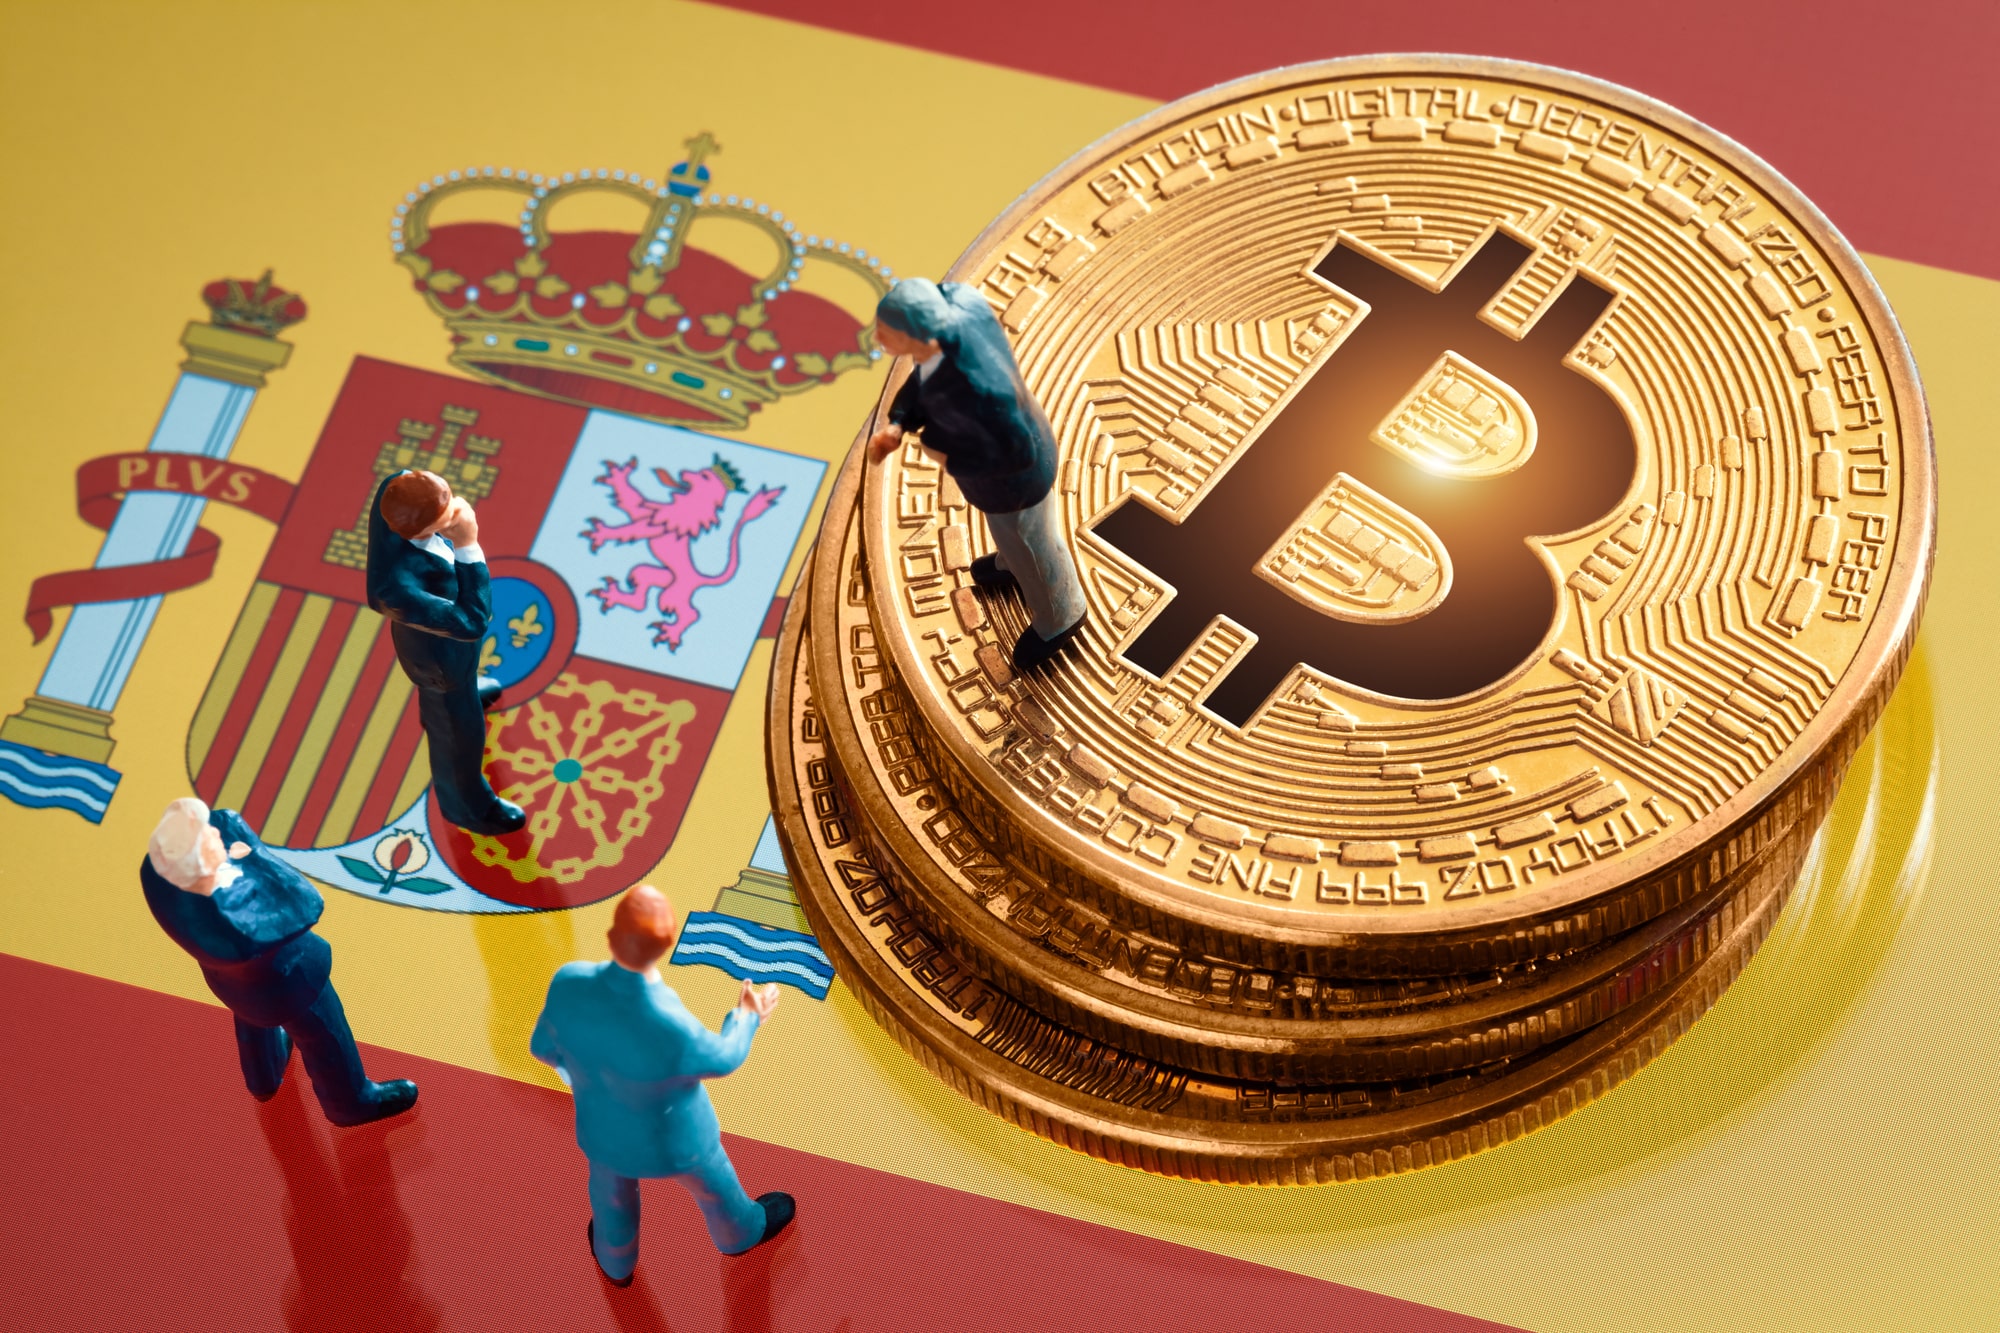 Spanish leading party proposes to create a national digital currency